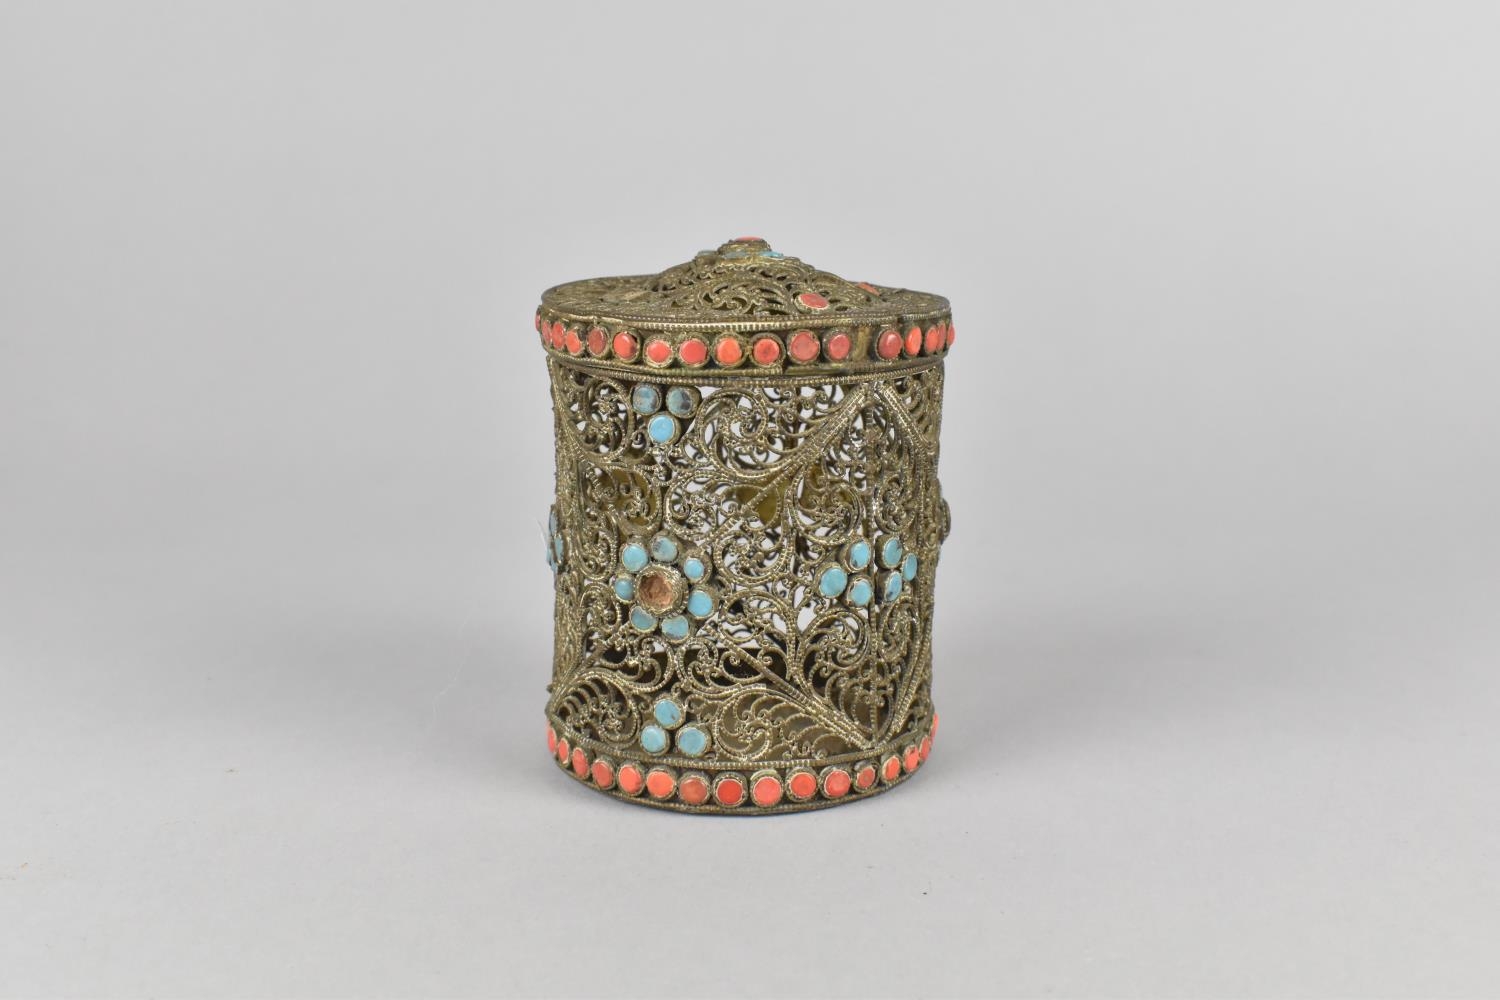 A Late 19th Century White Metal Cylindrical Filigree Box with Turquoise and Coral Cabochons, 9cms - Image 4 of 4